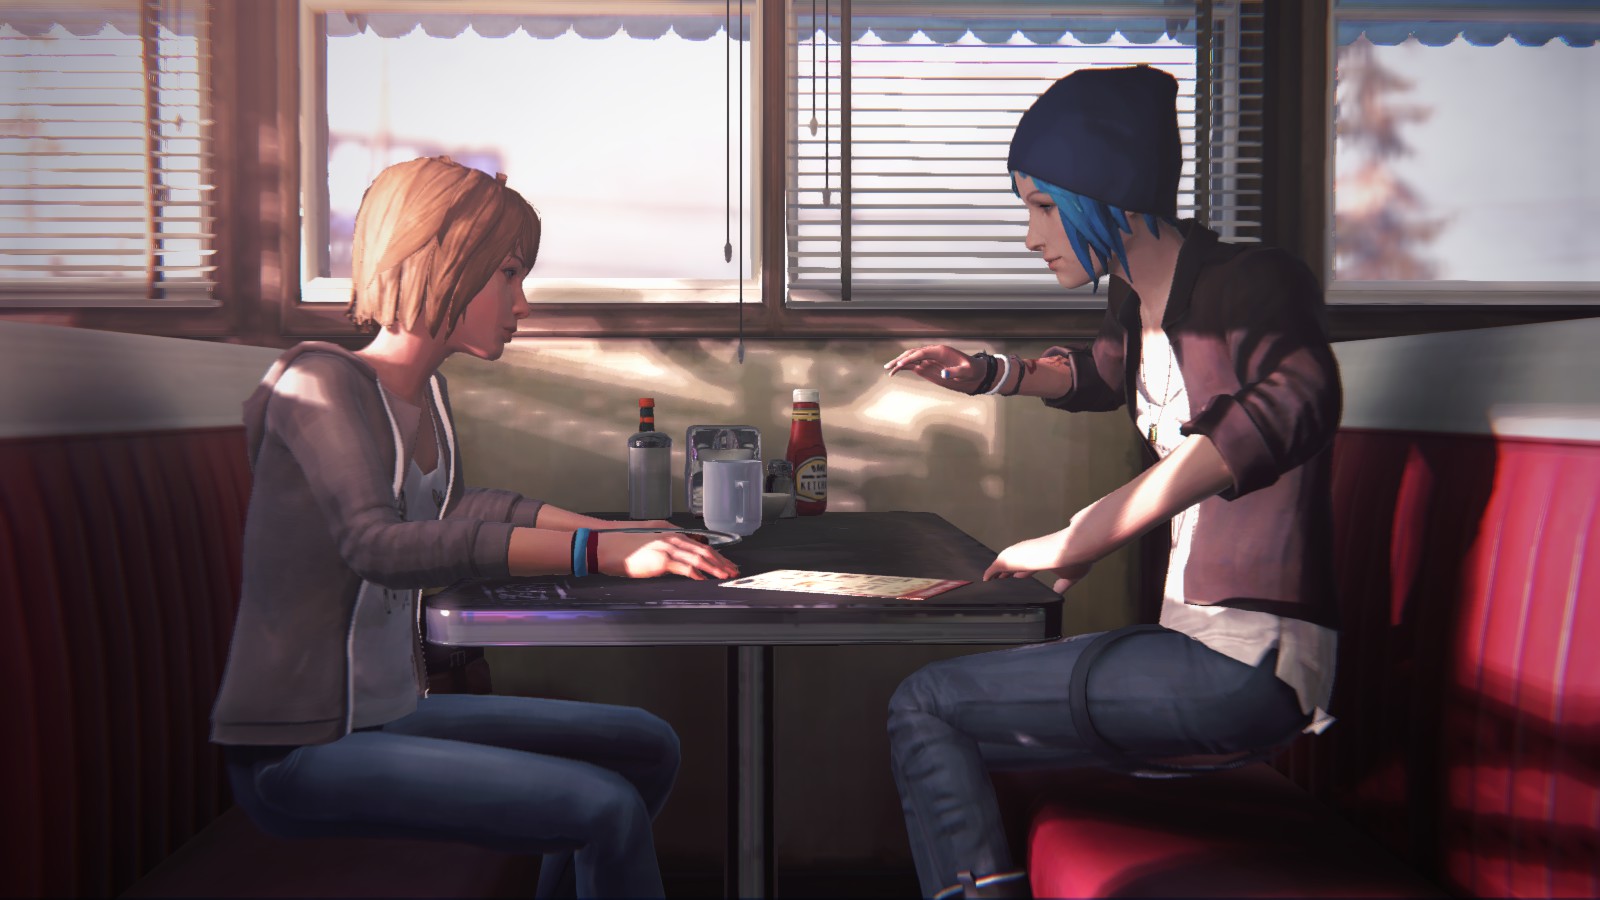 Max Caulfield, Chloe Price, Life Is Strange, Two Whales Diner Wallpaper